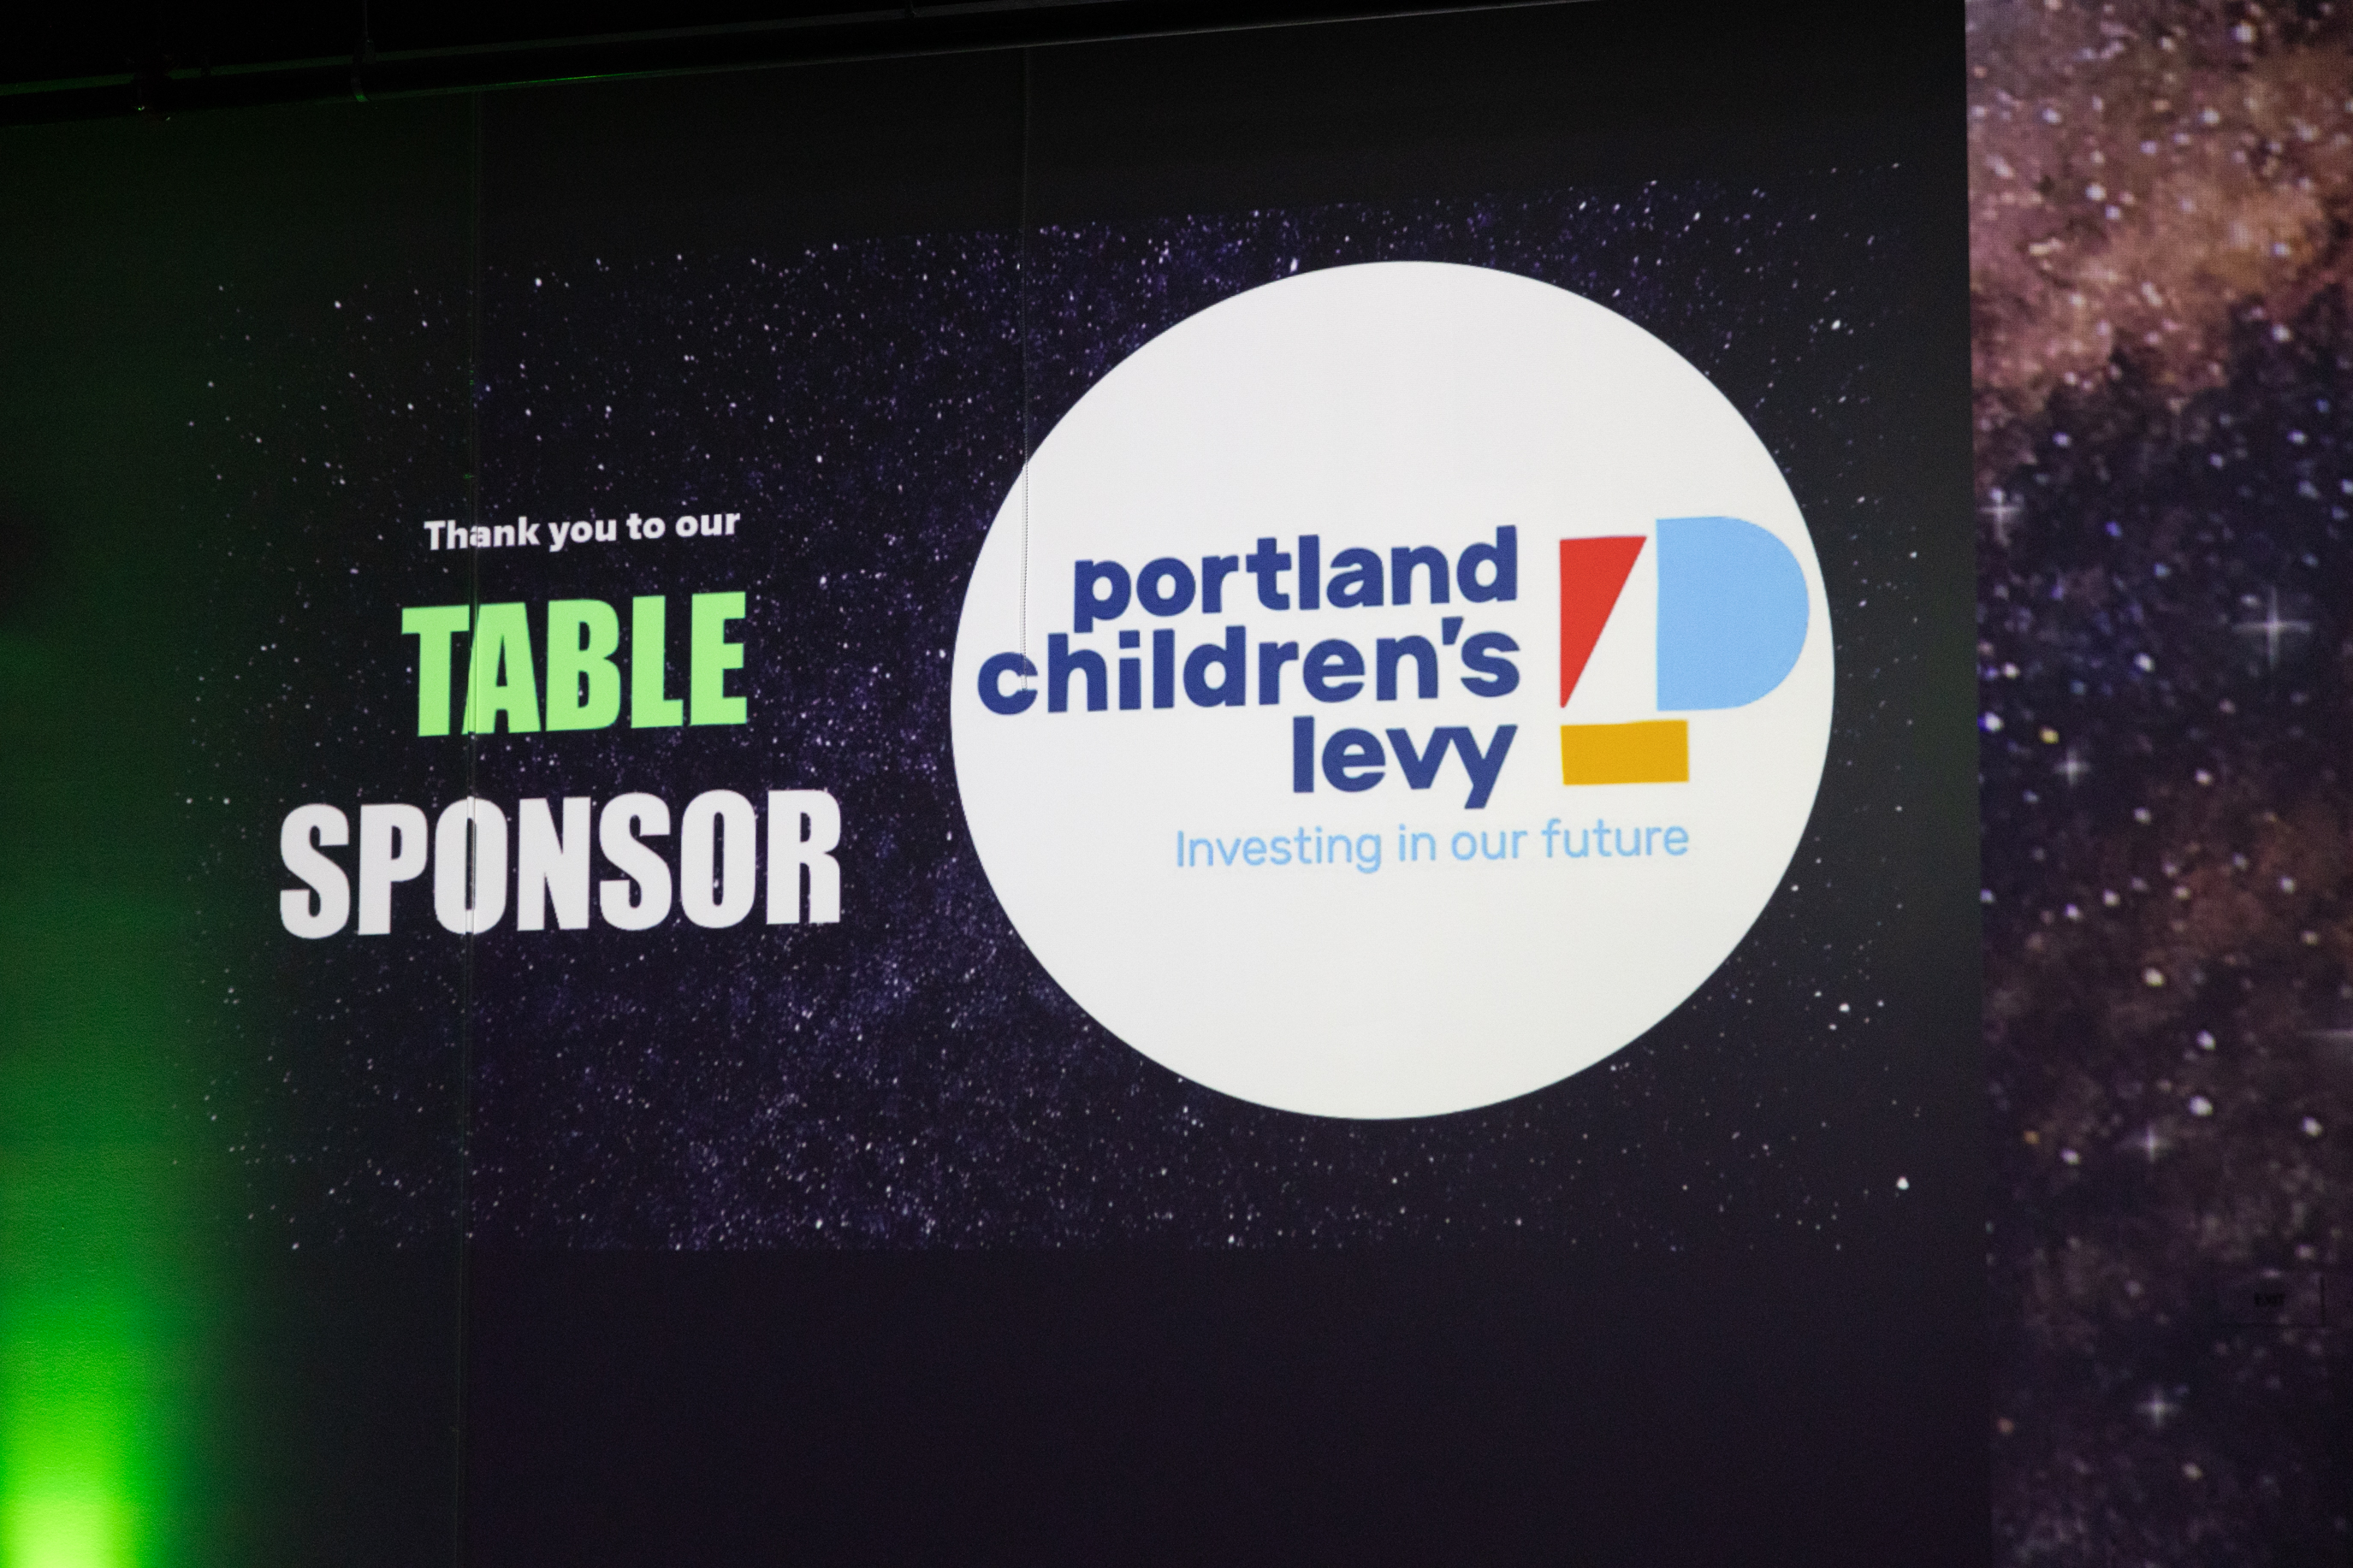 Photo of Portland Children’s Levy logo shown as a table sponsor during a presentation at a Big Brothers Big Sisters event.